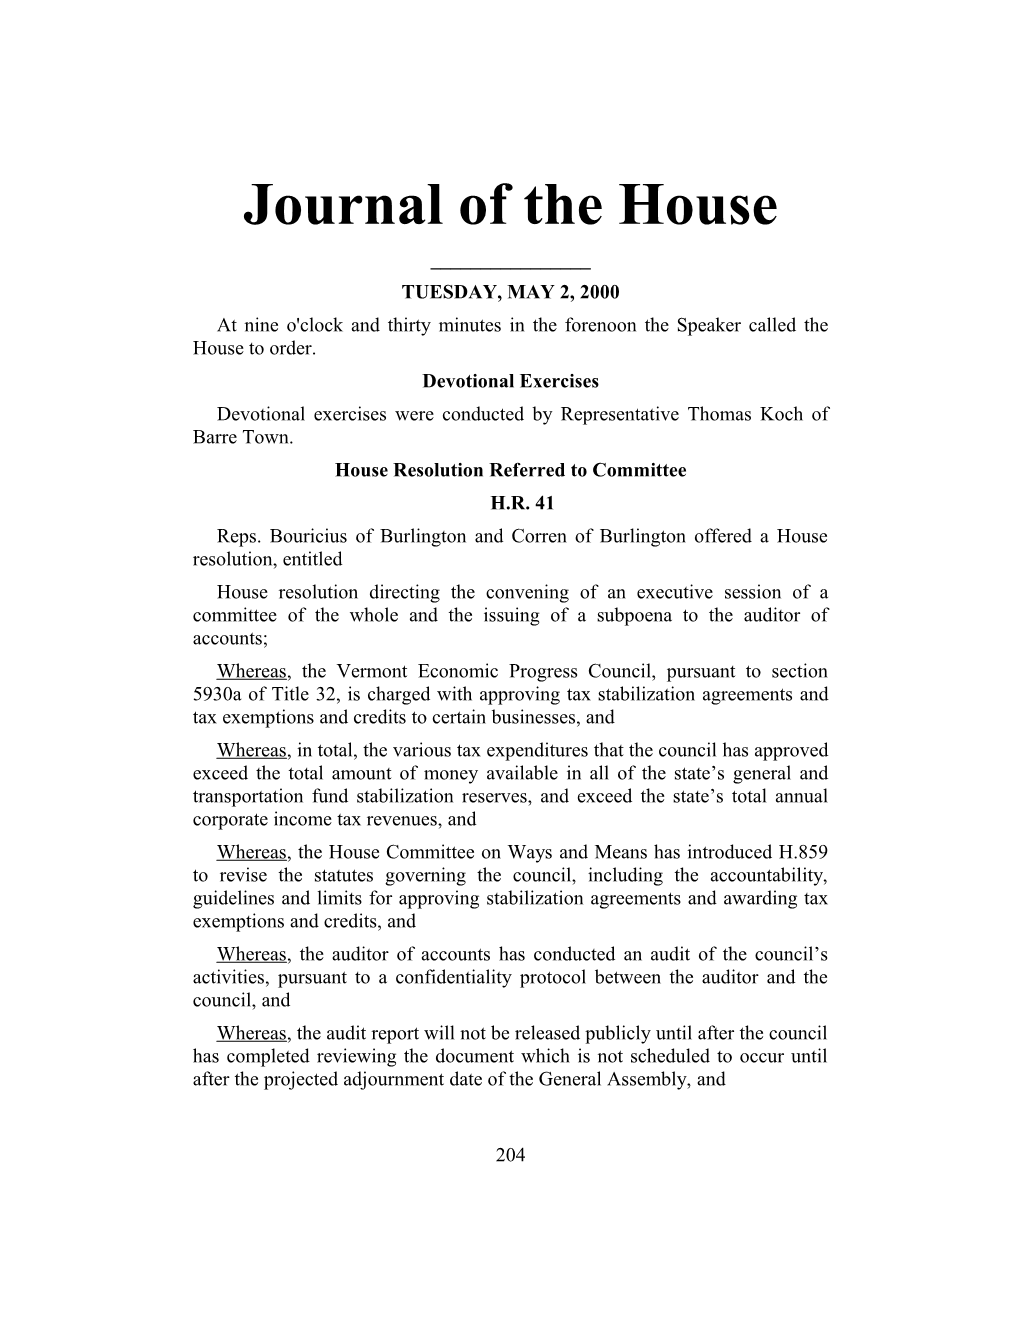 Journal of the House s1